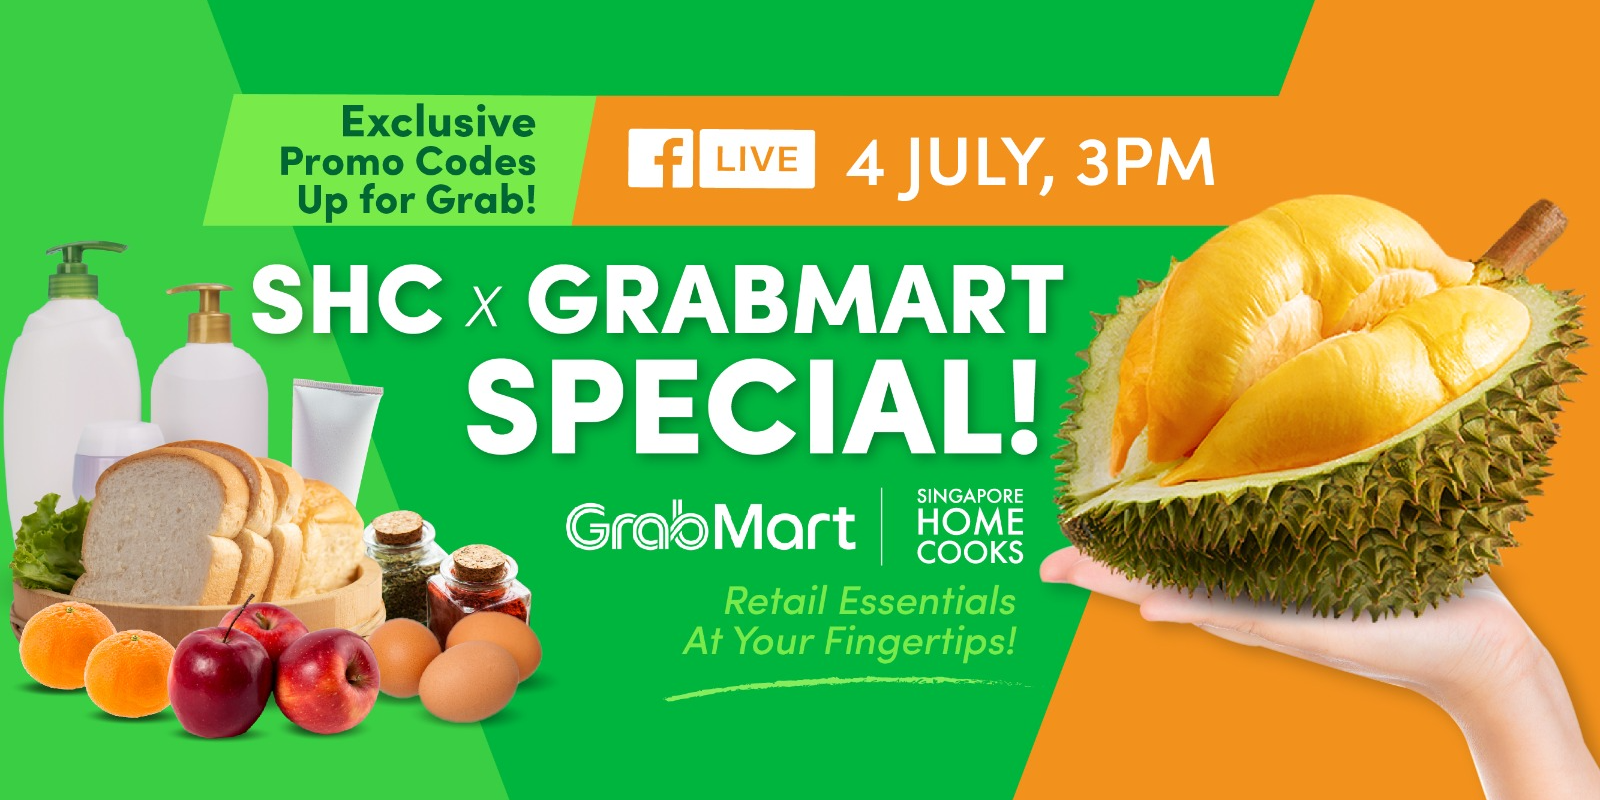 $12 OFF GrabDurian promo code and WIN MSW durians and puffs – only on Singapore Home Cooks